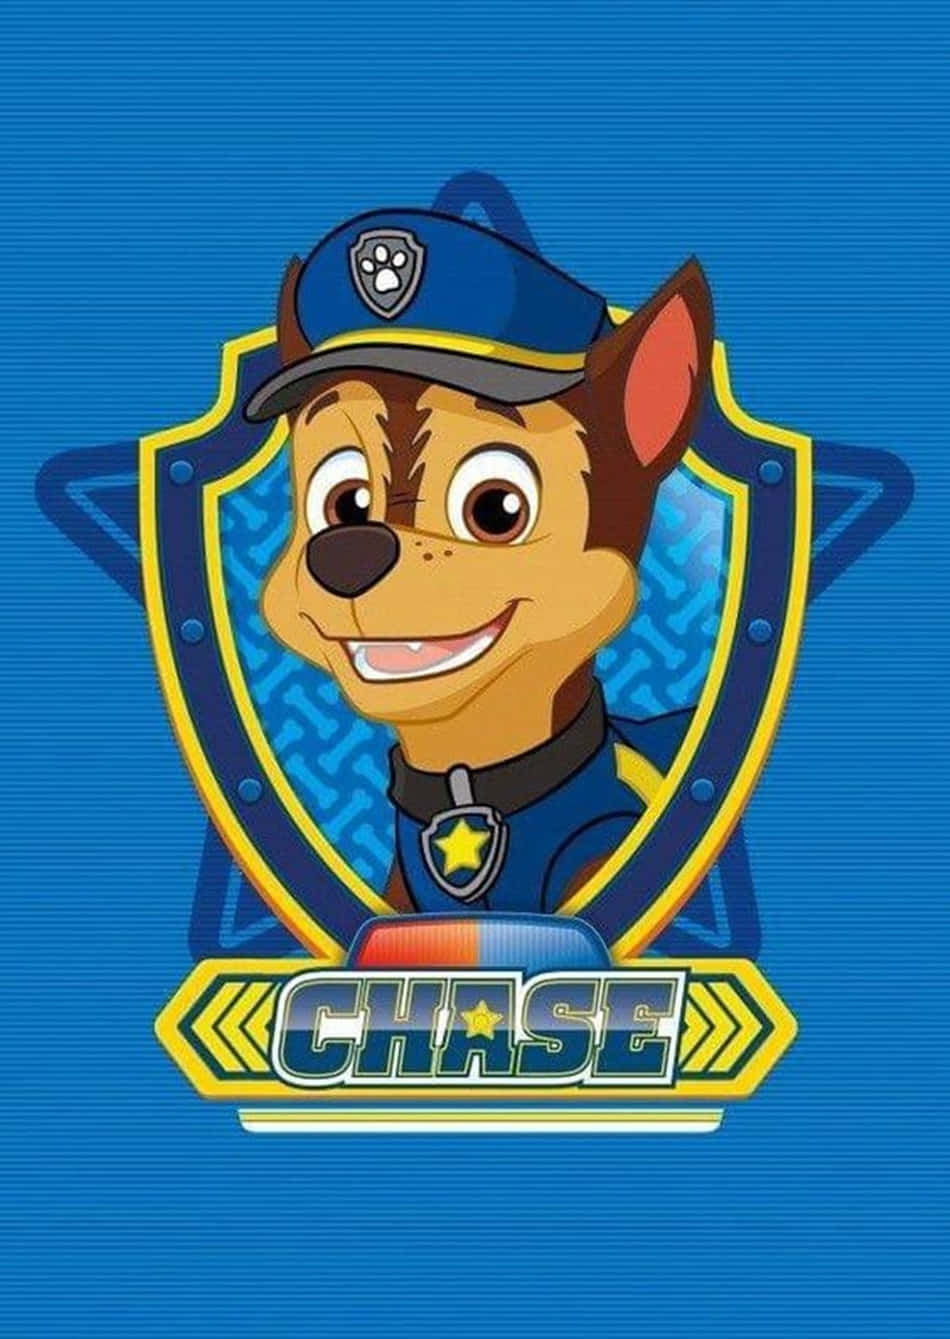 Chase from PAW Patrol is ready for his next mission! Wallpaper